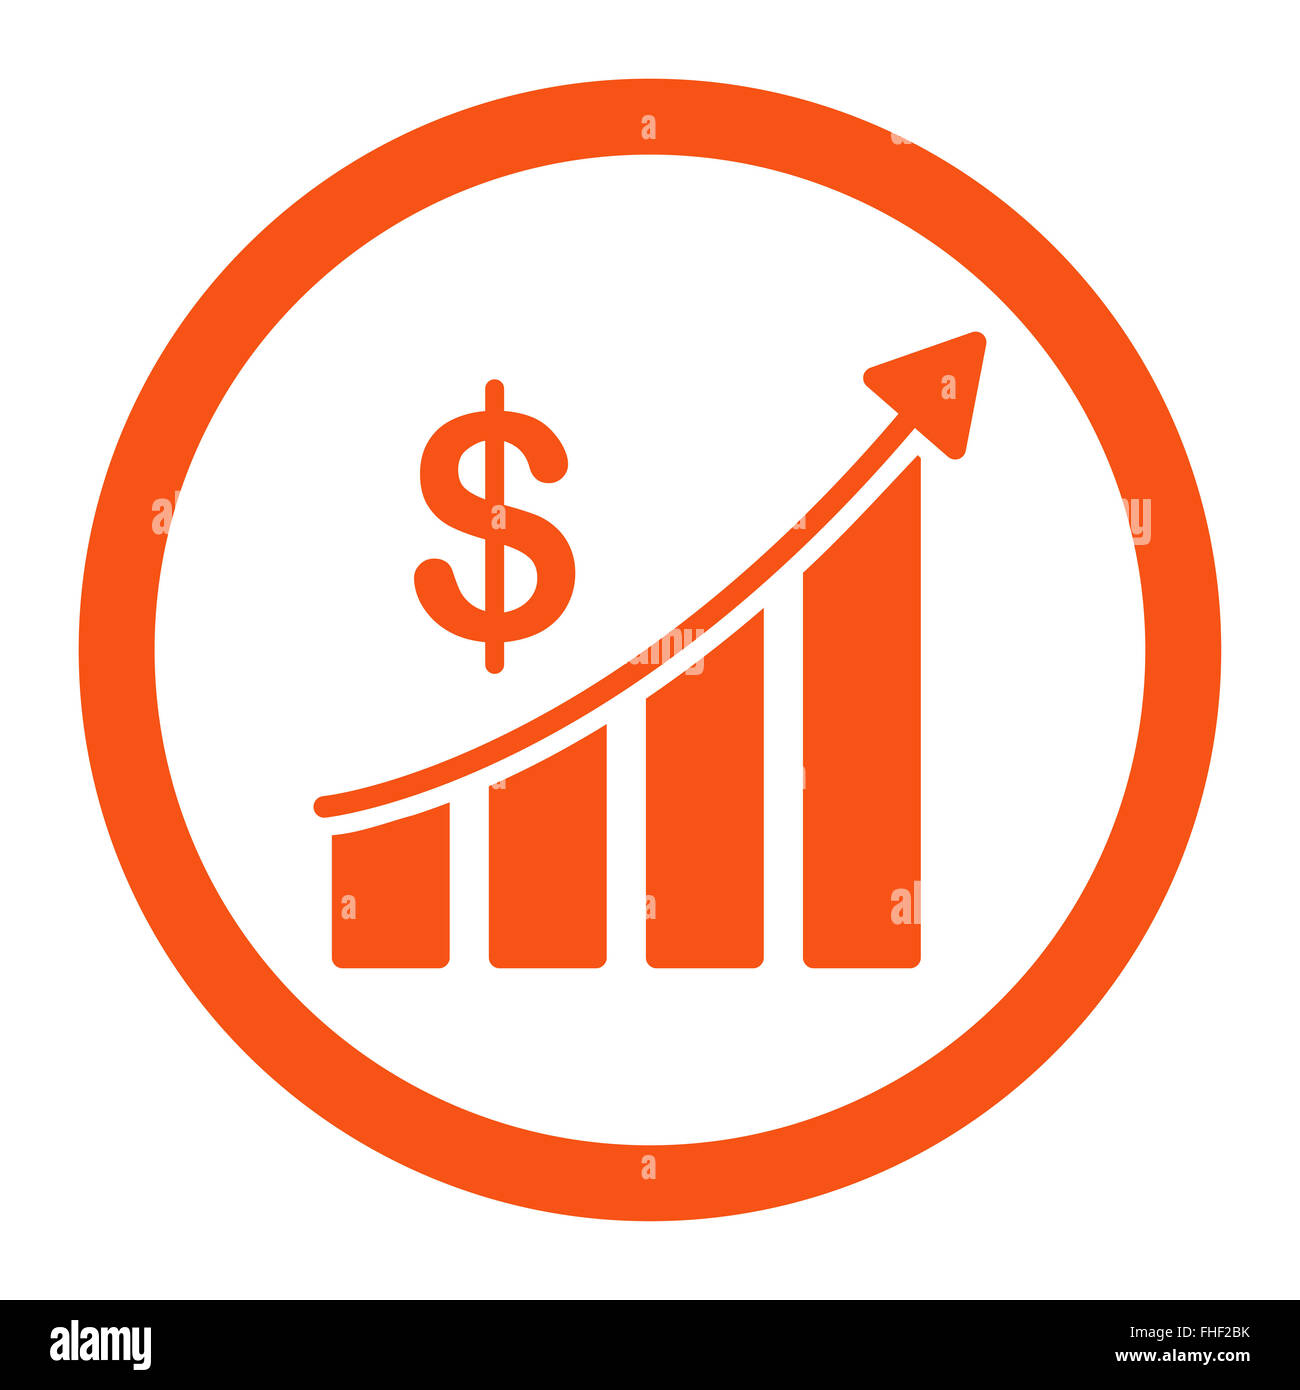 Sales Flat Orange Color Rounded Vector Icon Stock Photo Alamy